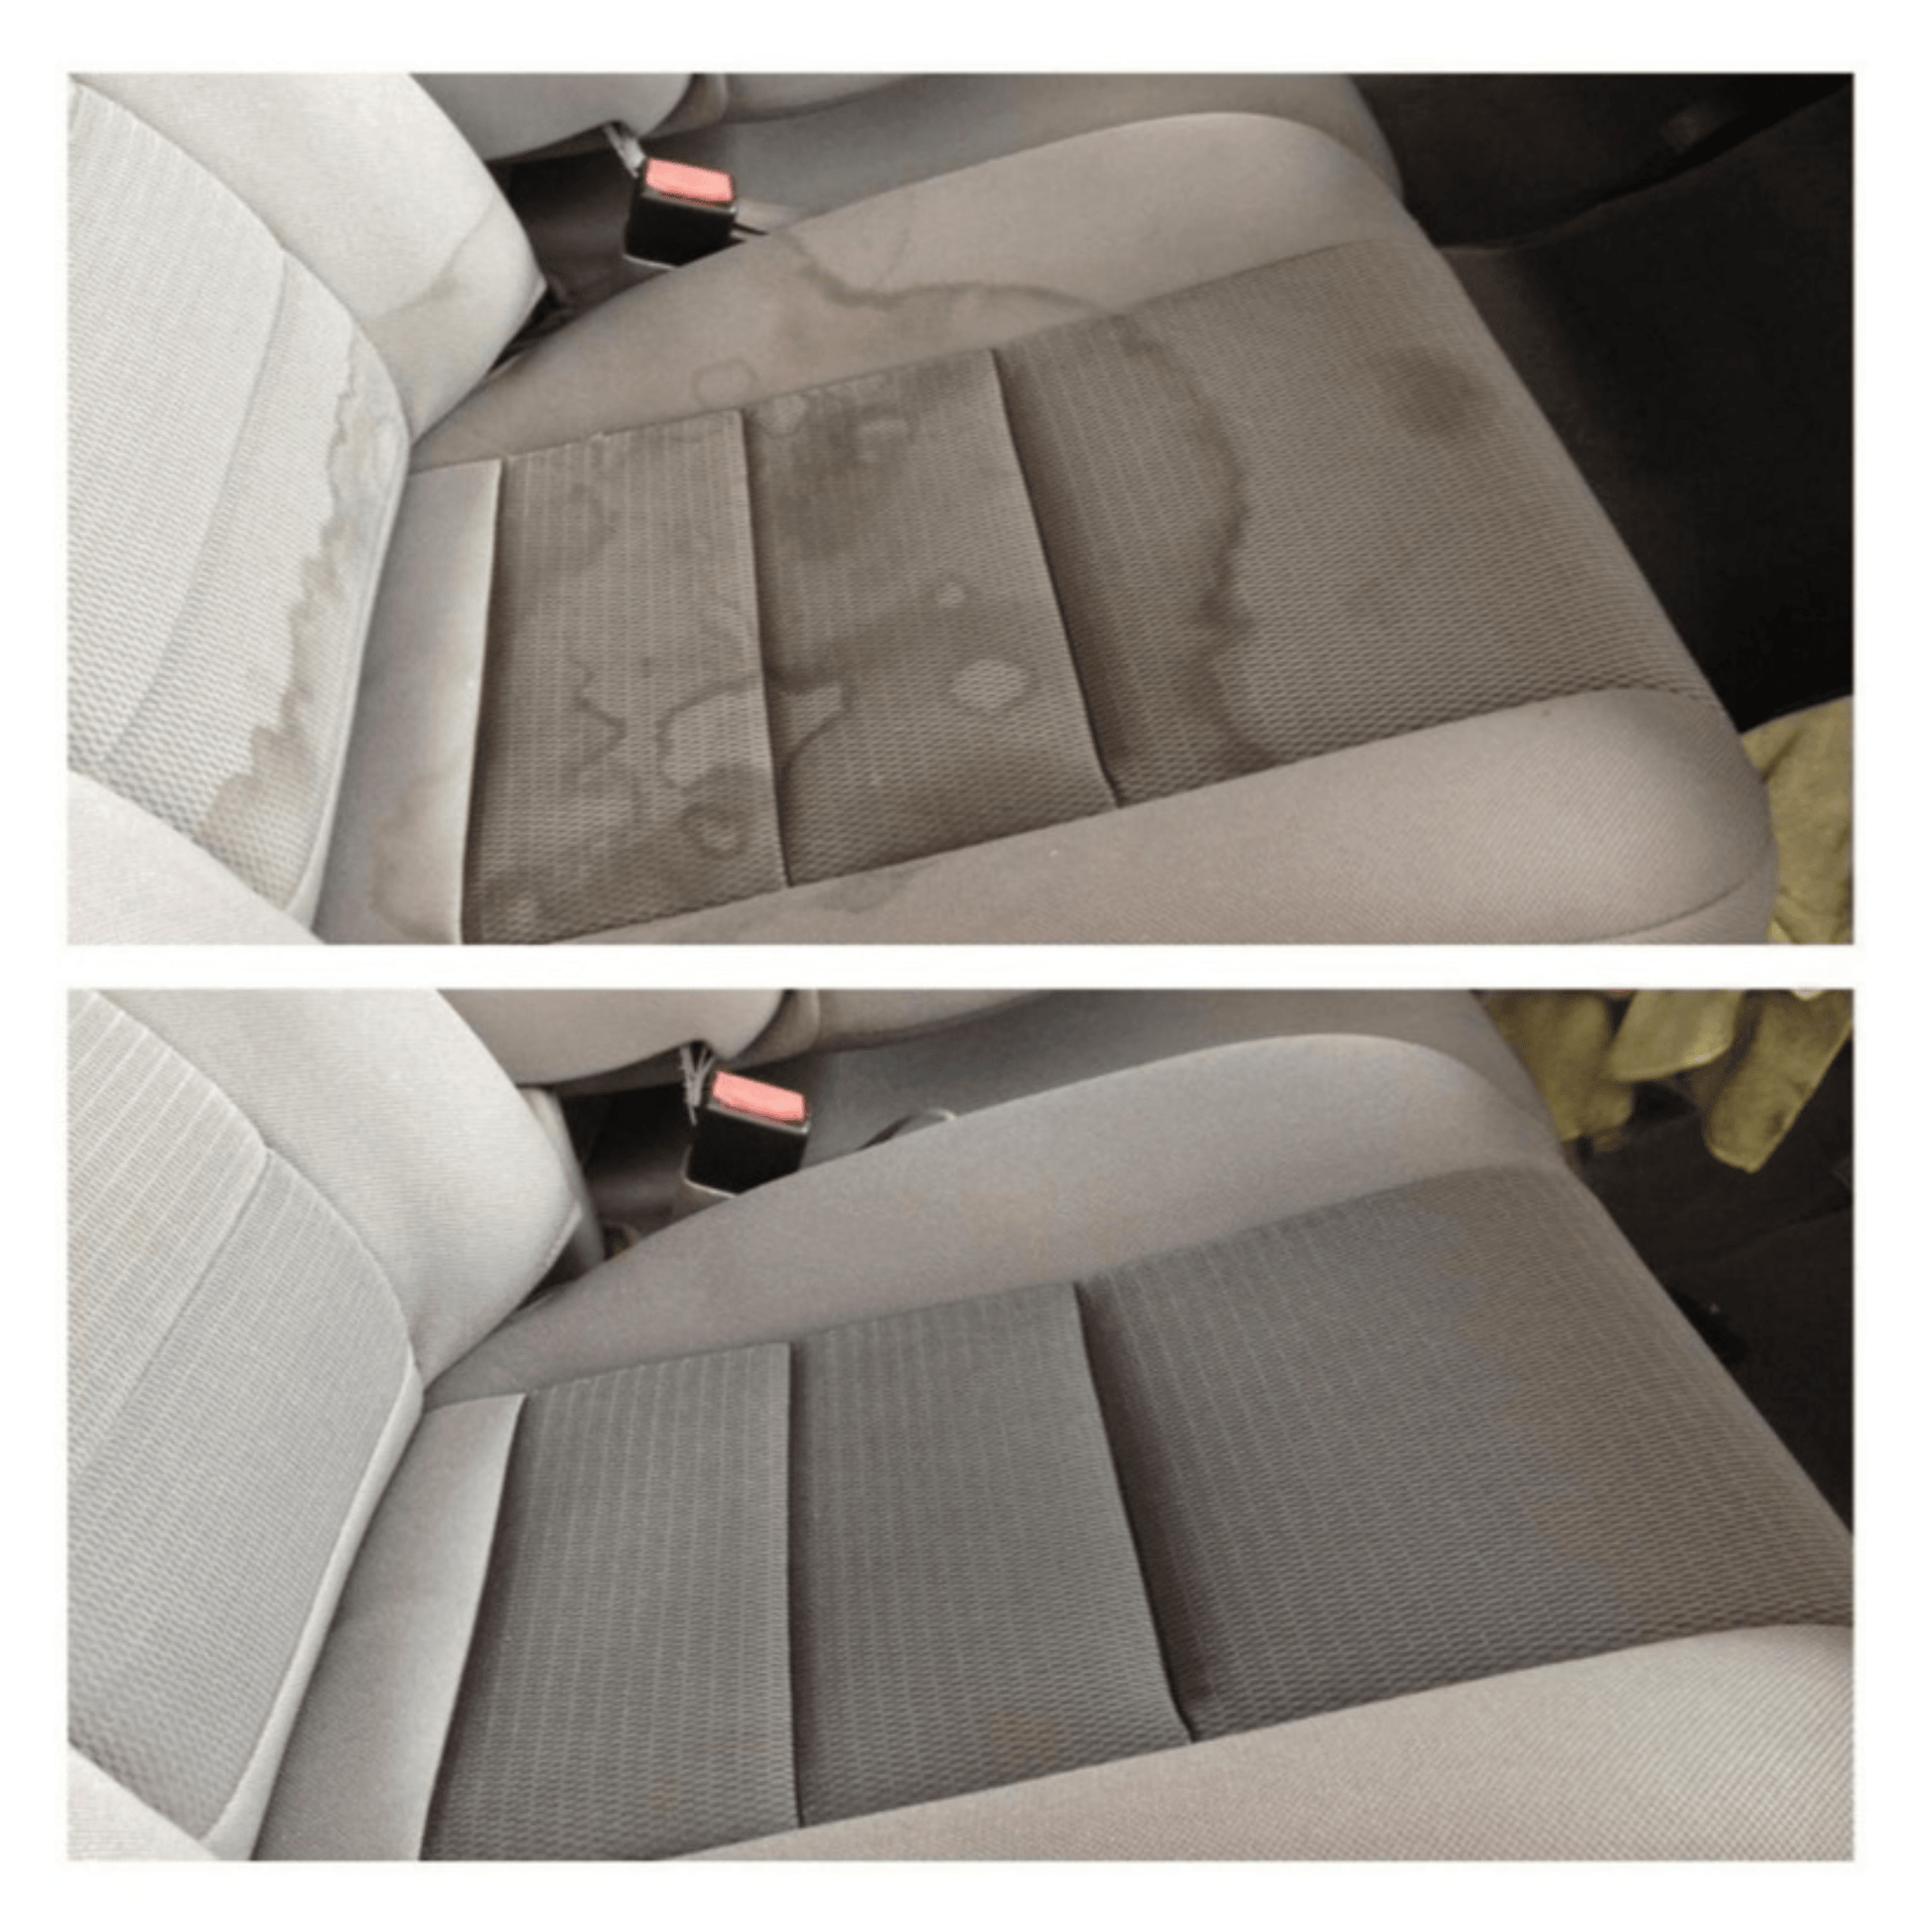 The Best Car Seat Cleaners For Fabric & Upholstery: An In-Depth Review